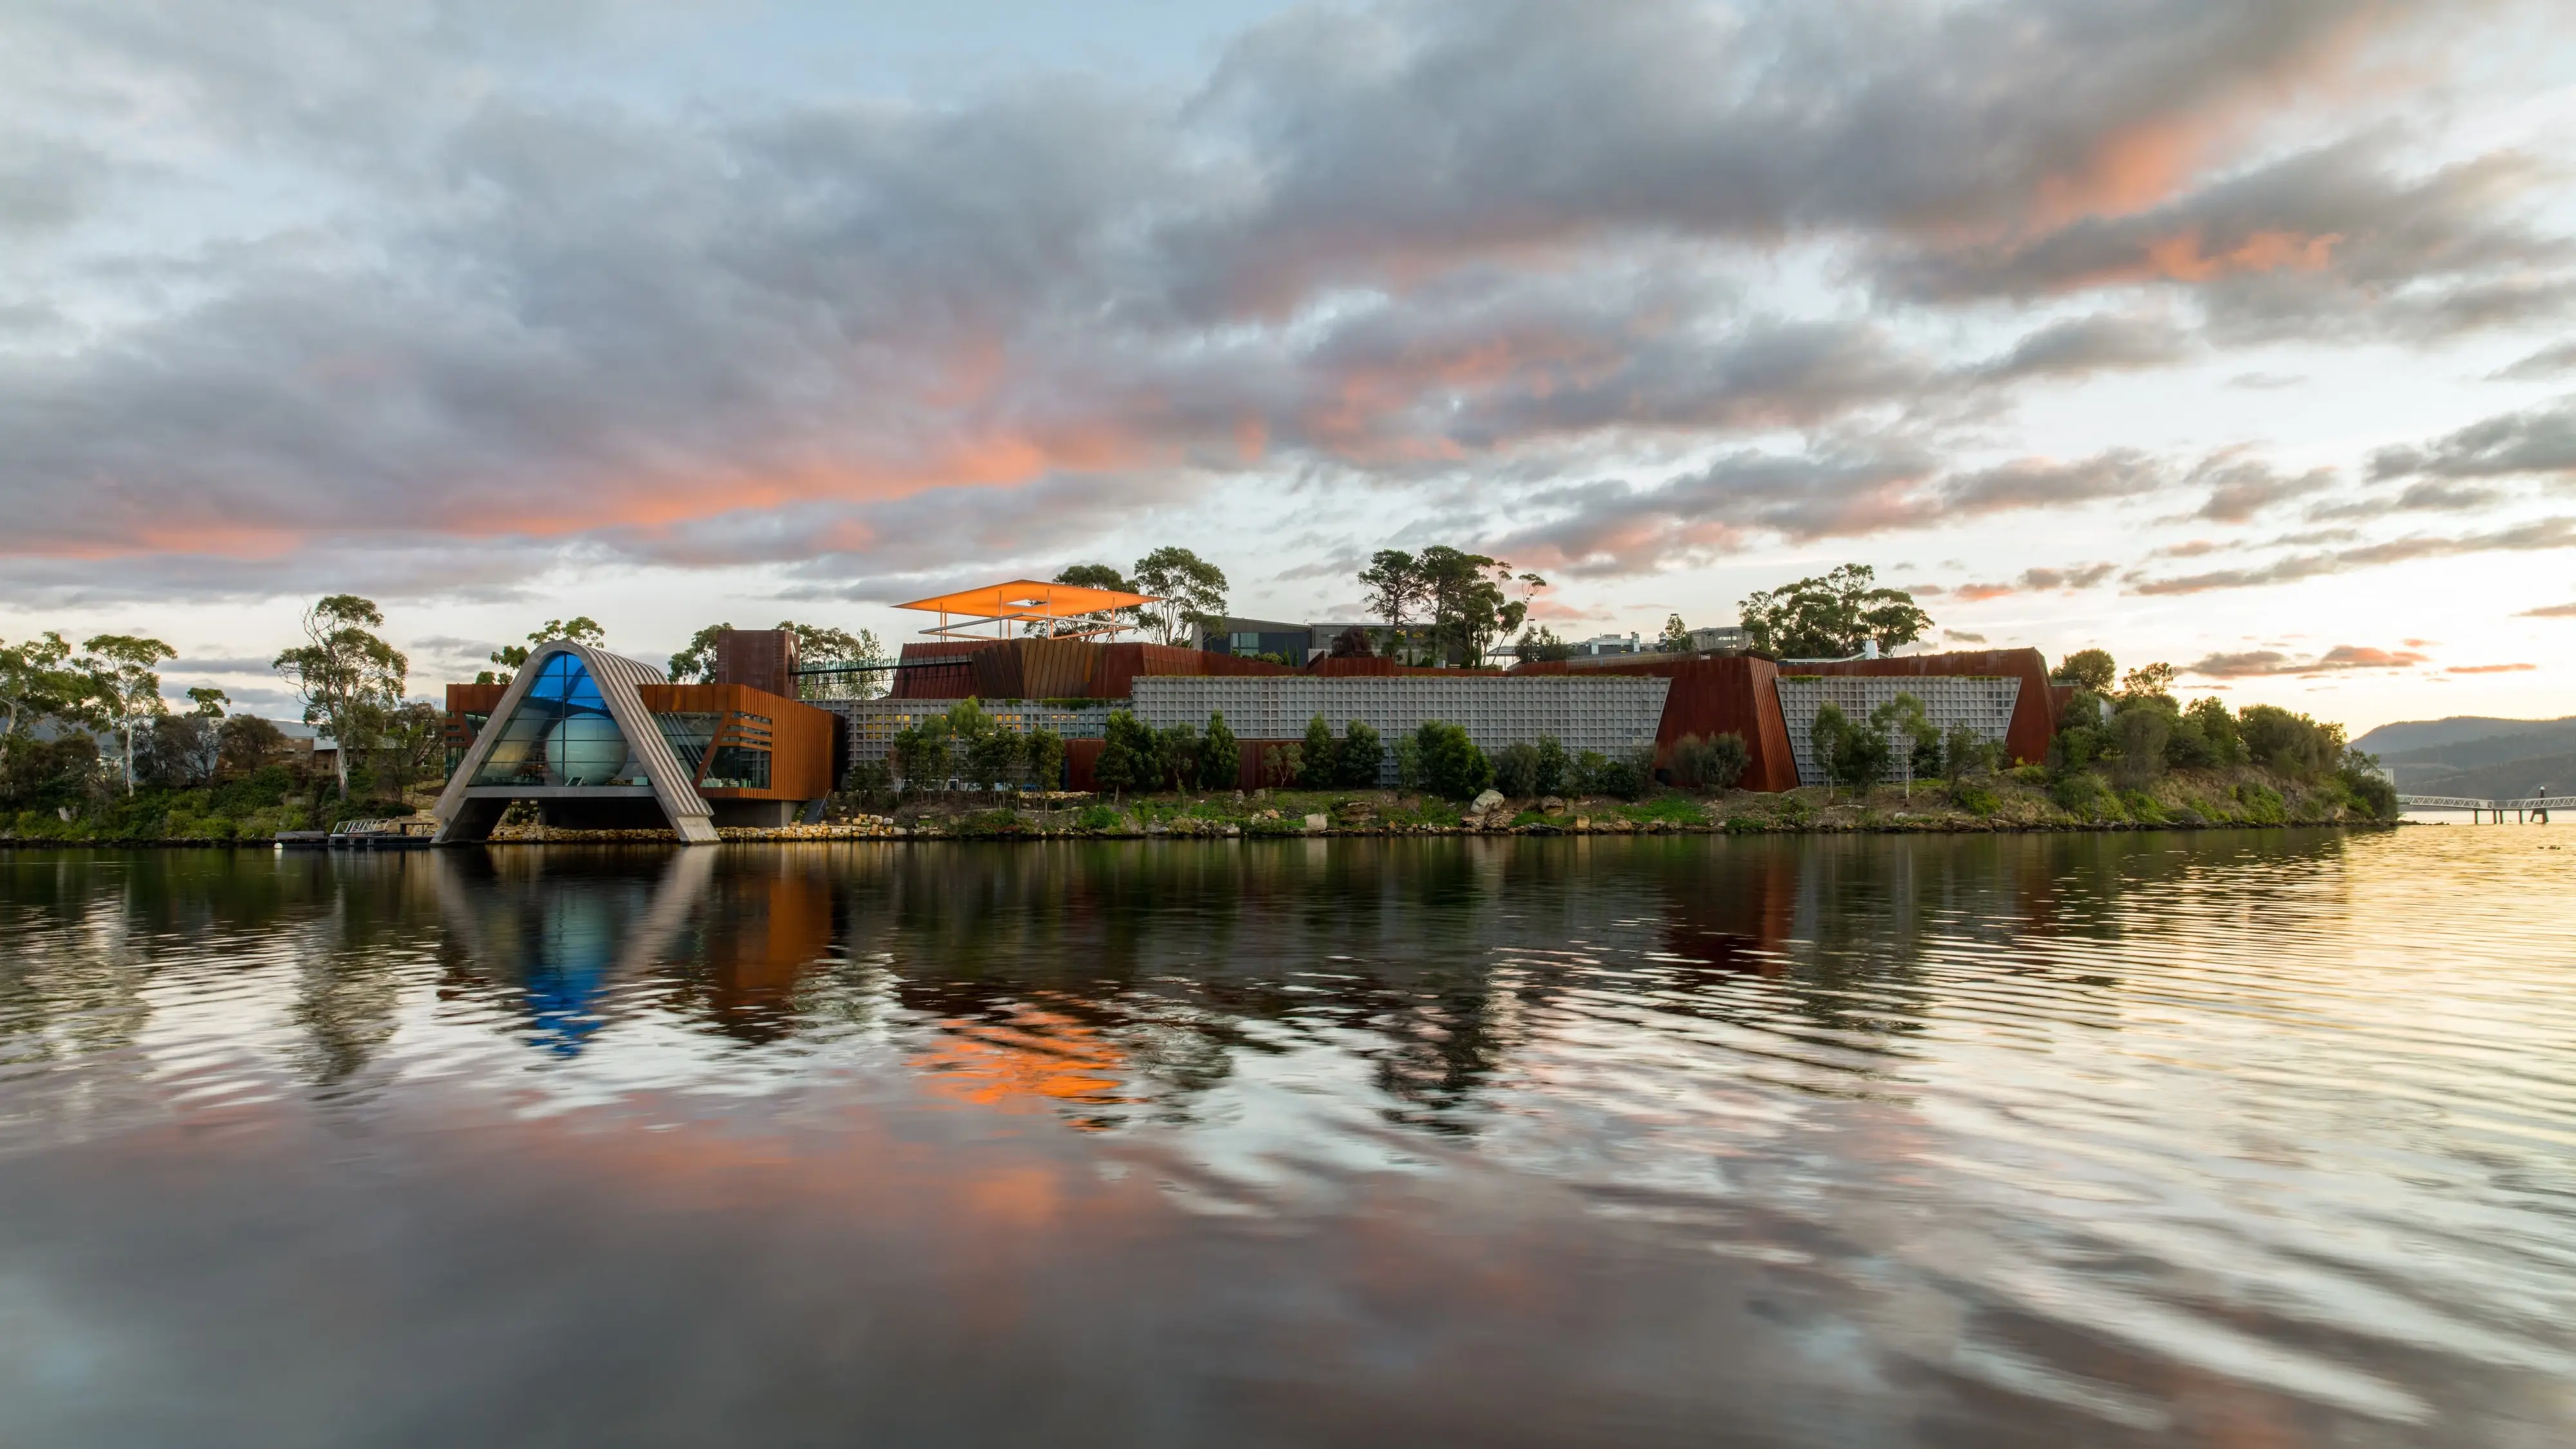 Geometric buildings of Mona with the Derwent River in the foreground and a sunset sky. Image credit: Mona/Jesse Hunniford